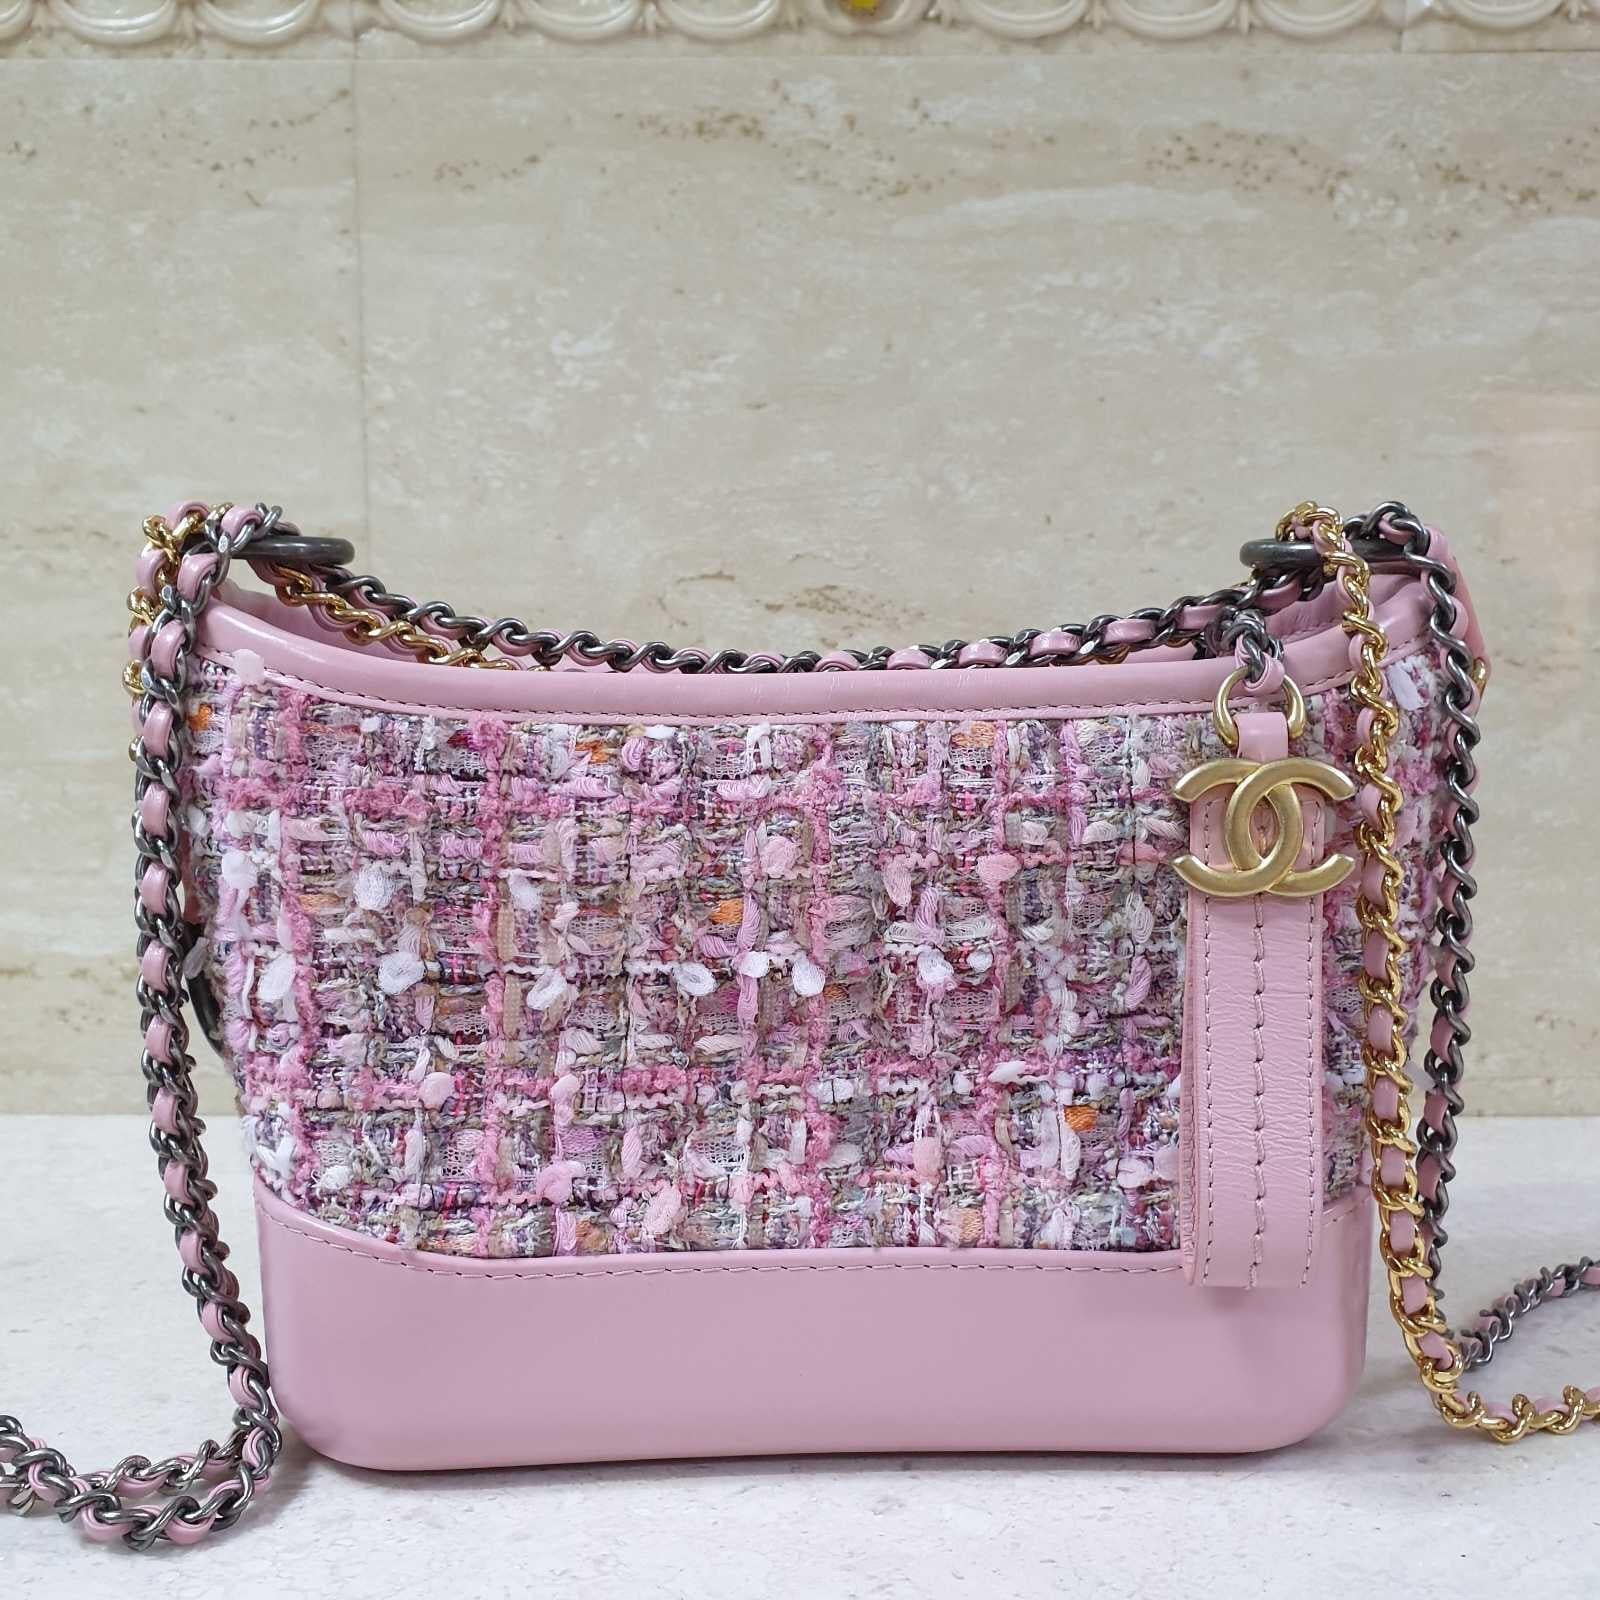 CHANEL’S GABRIELLE SMALL HOBO BAG

2019 Seasonal Colour

Materials:

Tweed, Calfskin, Gold-Tone & Silver-Tone Metal


Colour: Pink/multicolour


Dimensions:

15 x 20 x 8 cm

Condition is excellent

For buyers from EU we can provide shipping from